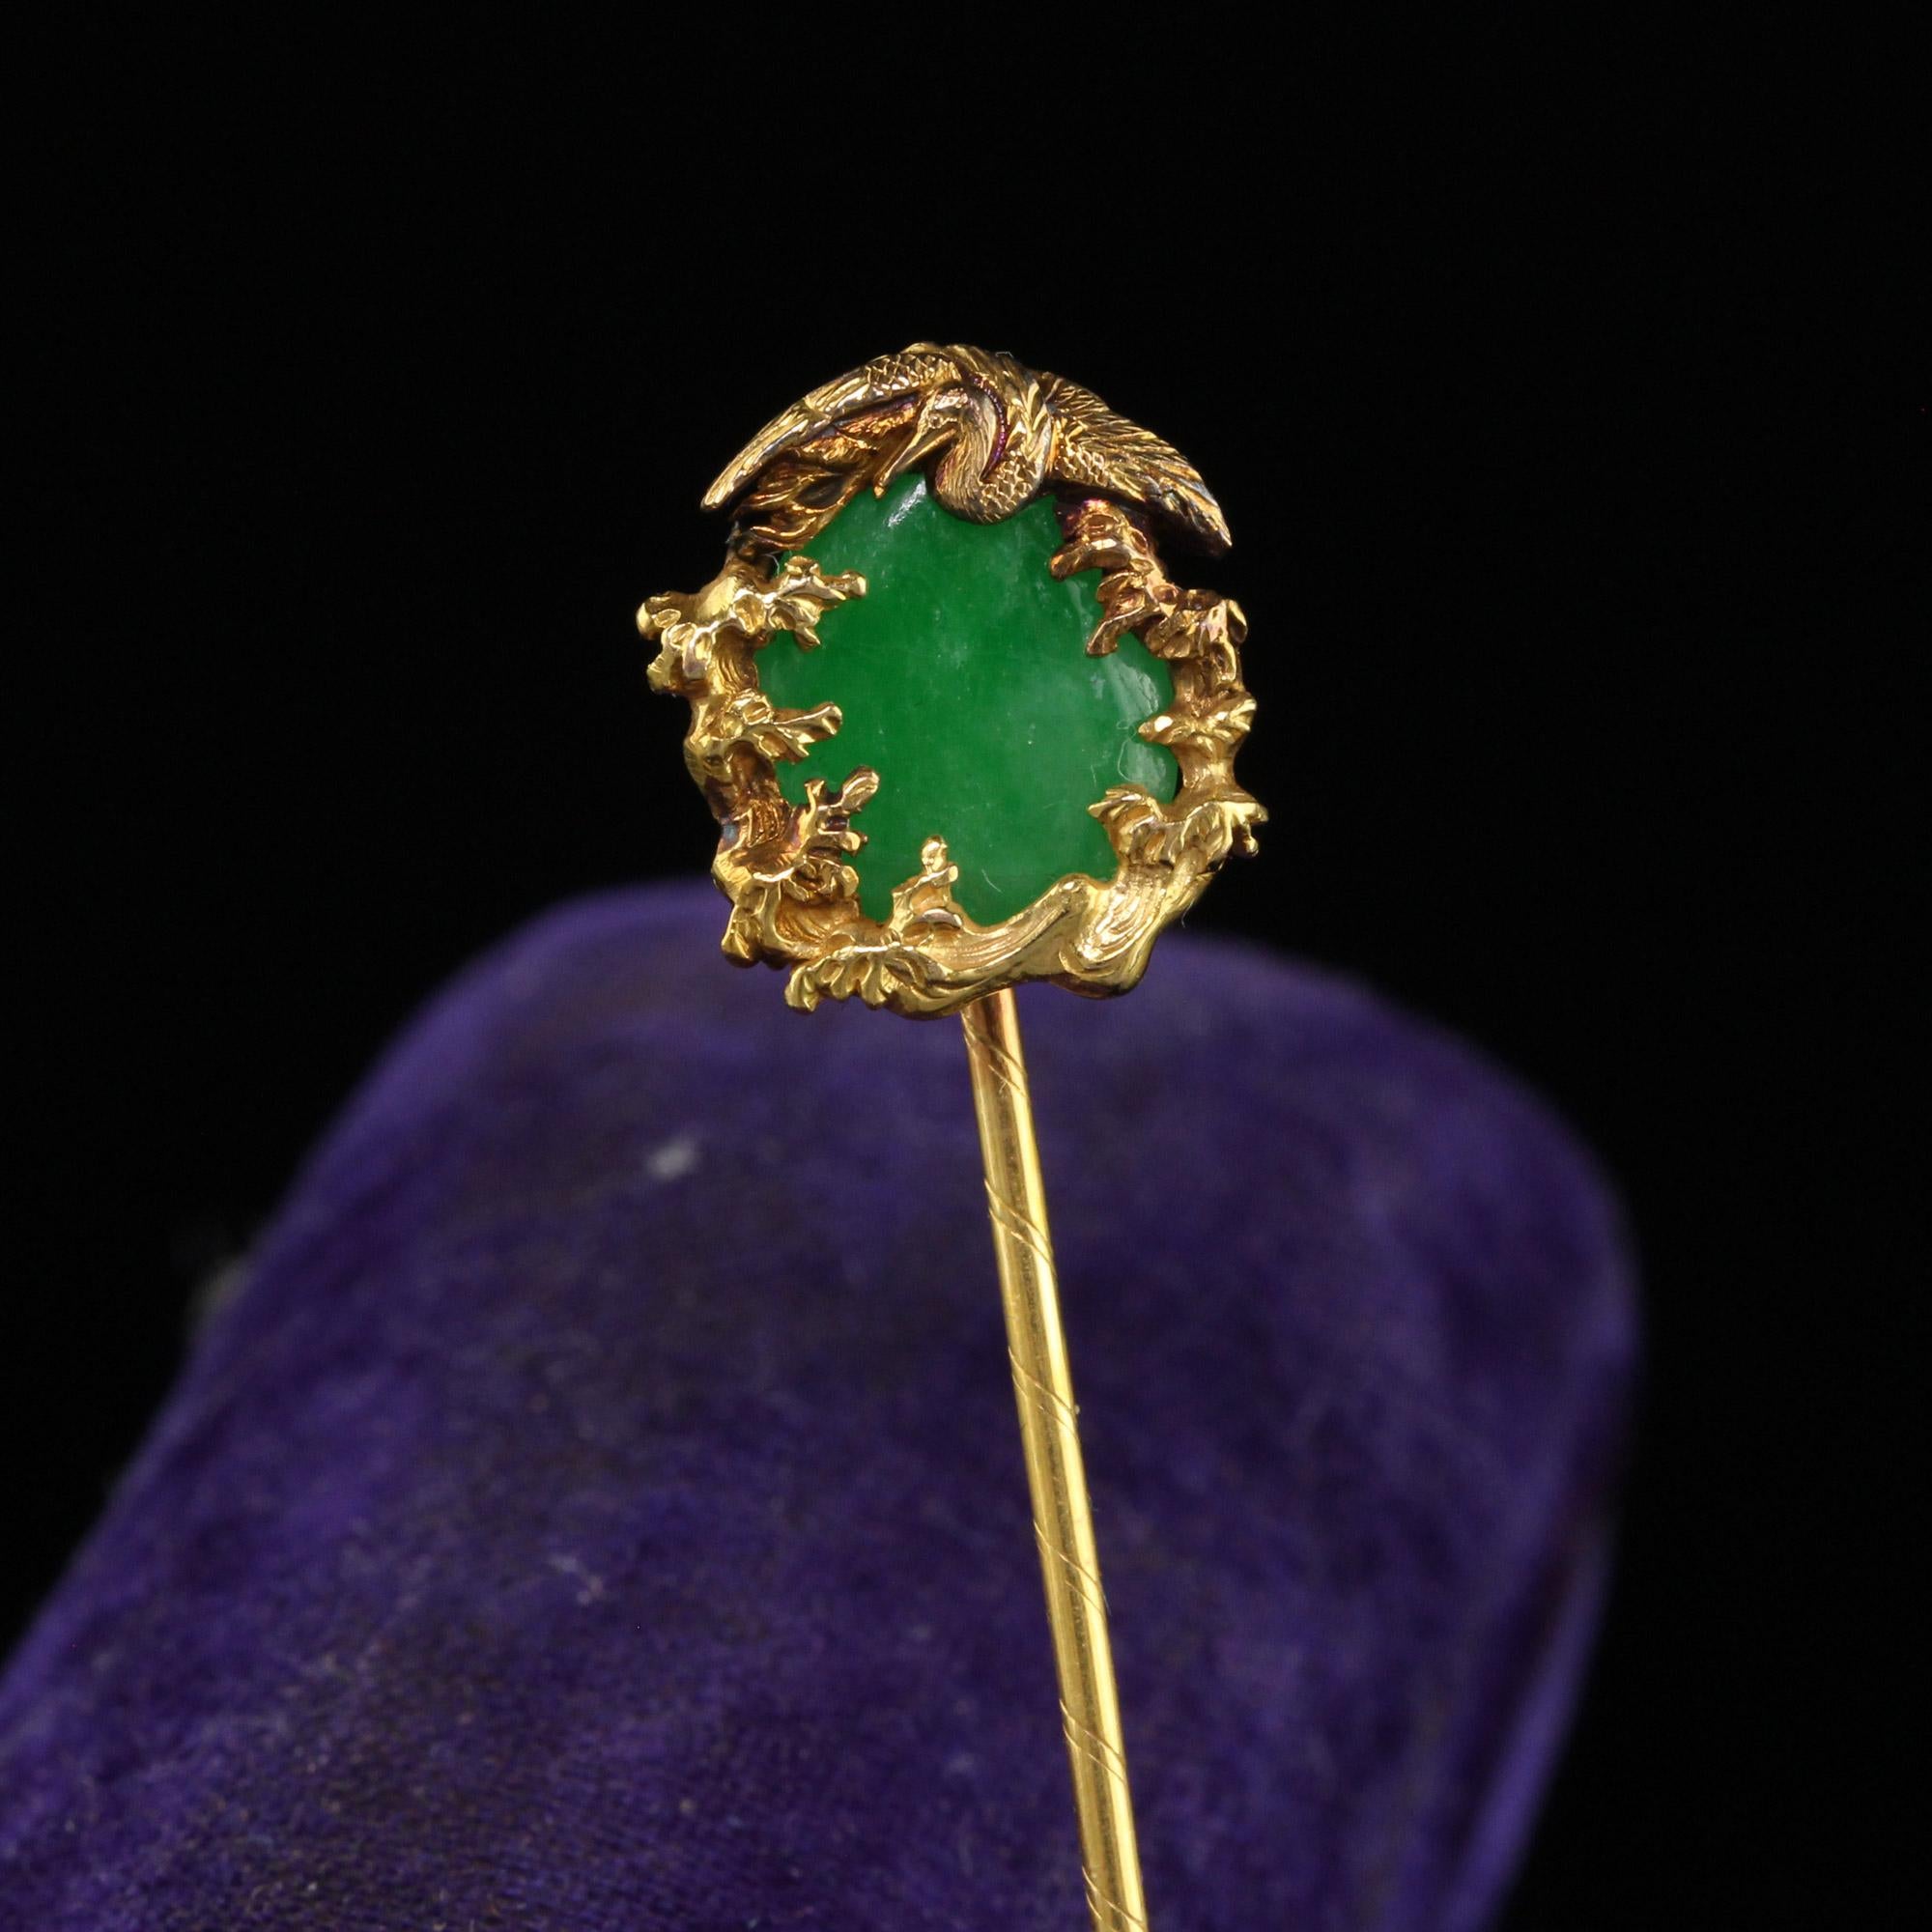 Beautiful Vintage Mid Century 18K Yellow Gold Natural Jade Crane Stick Pin. This gorgeous jade stick pin is crafted in 18k yellow gold. The center of the pin holds a natural green jade. The depicted scene is of a Crane bird sitting on top of the